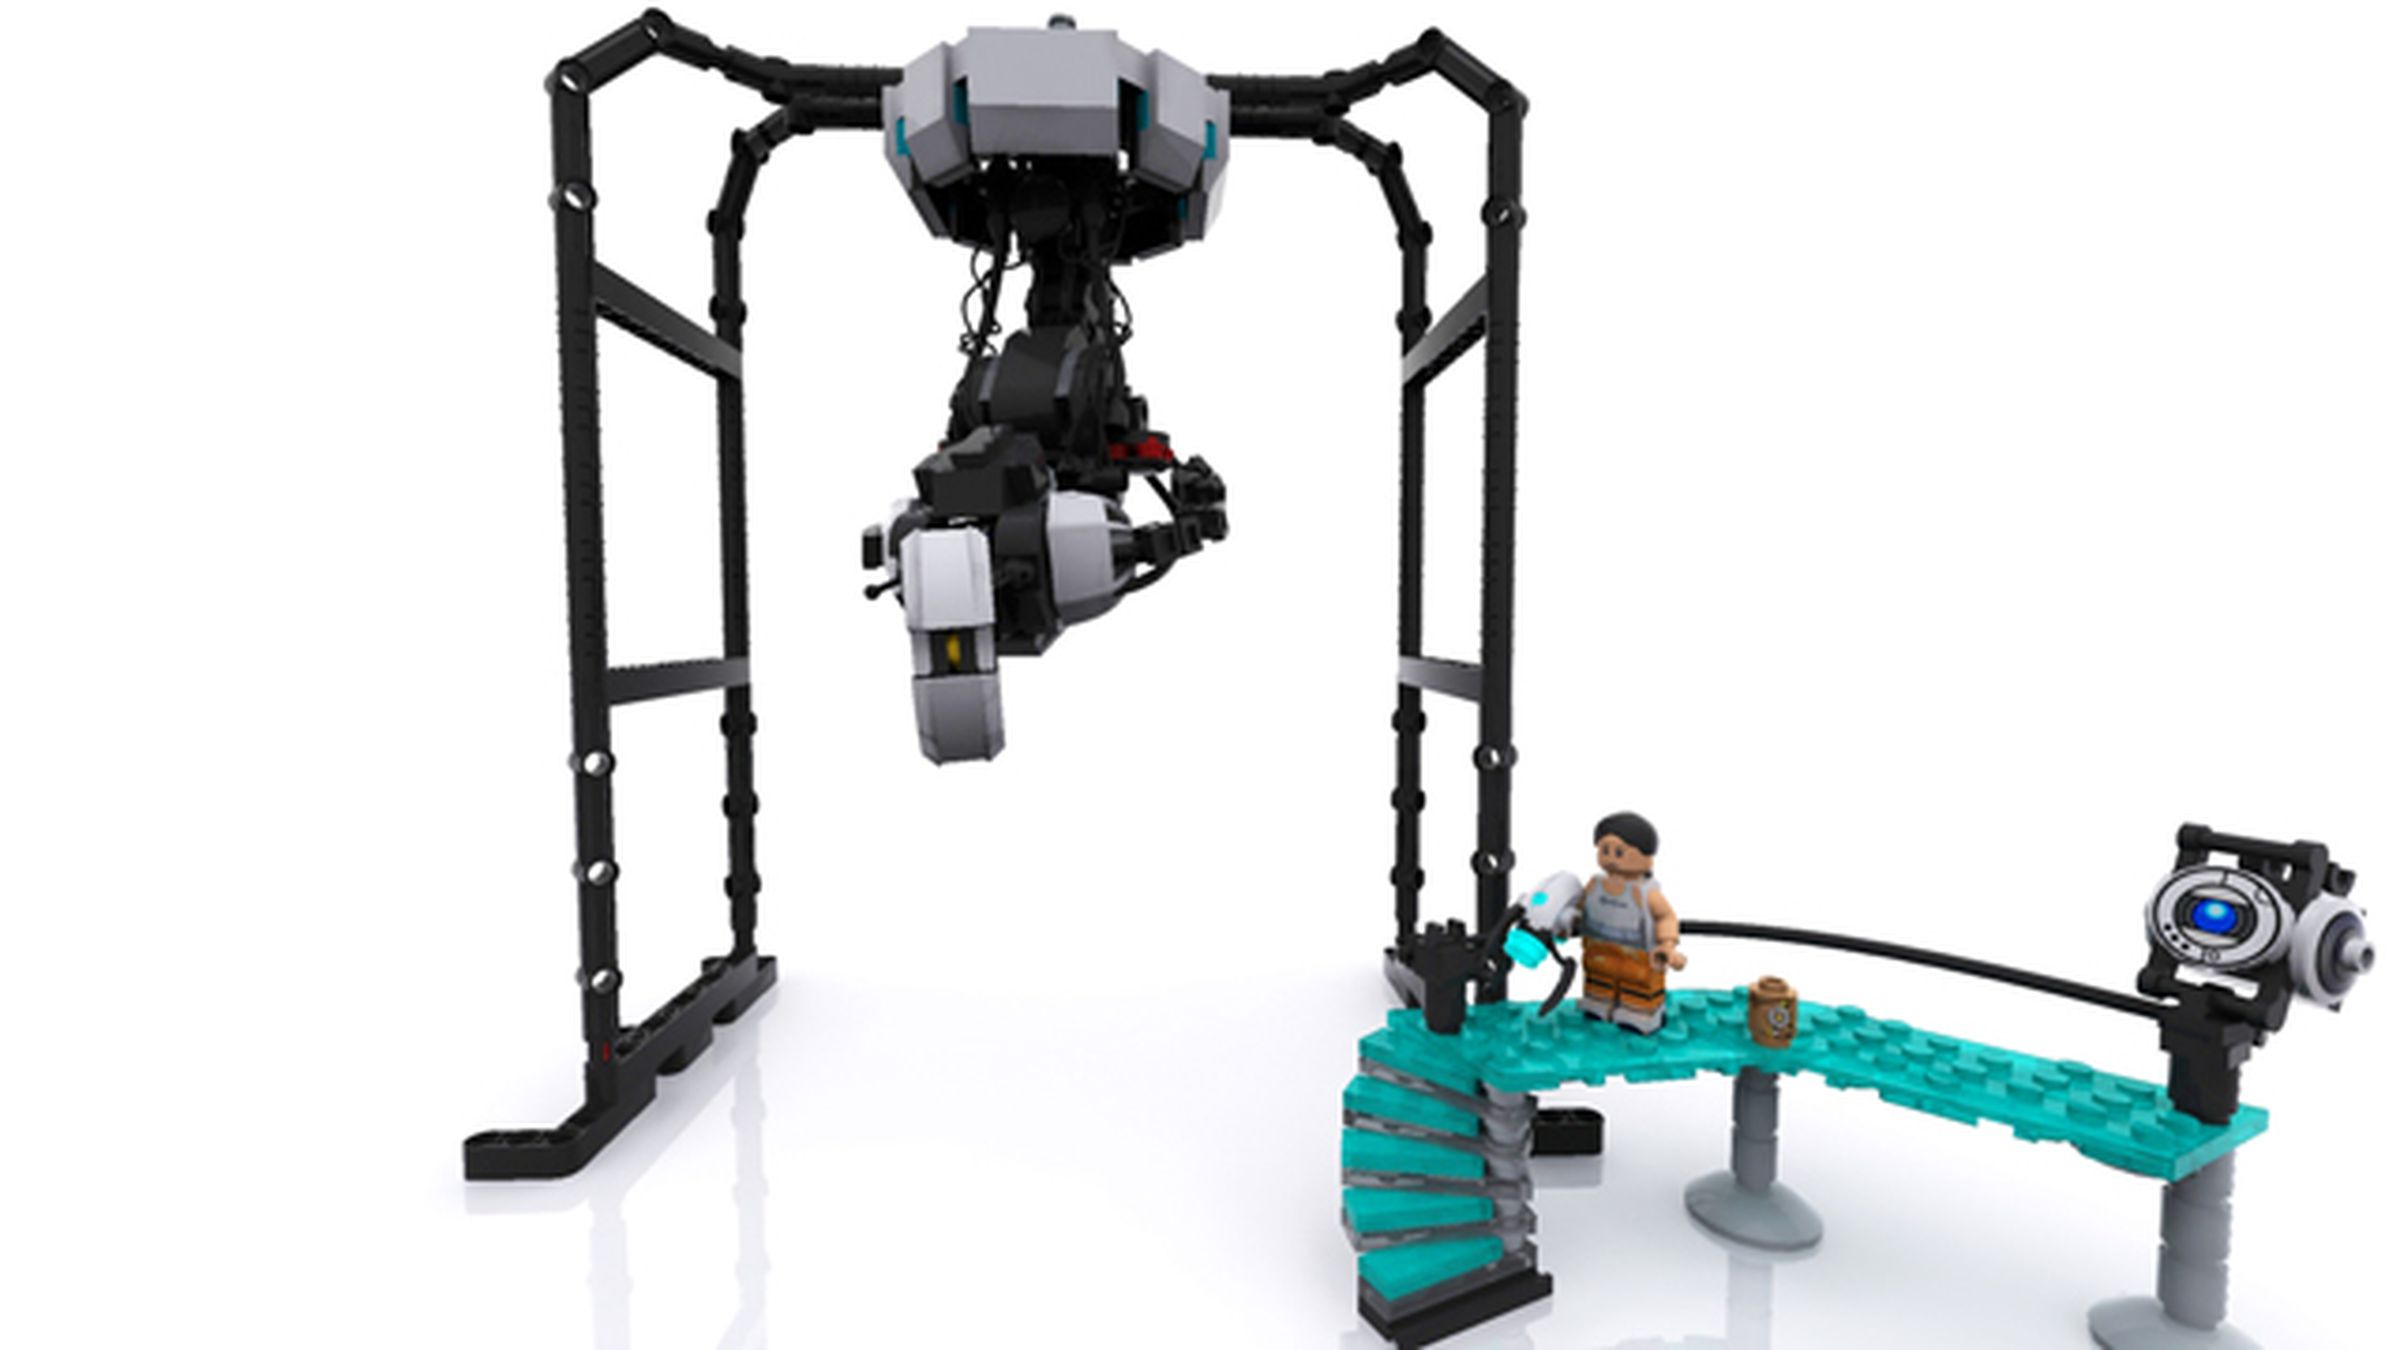 Images of the 'Portal' Lego project on Lego Cuusoo